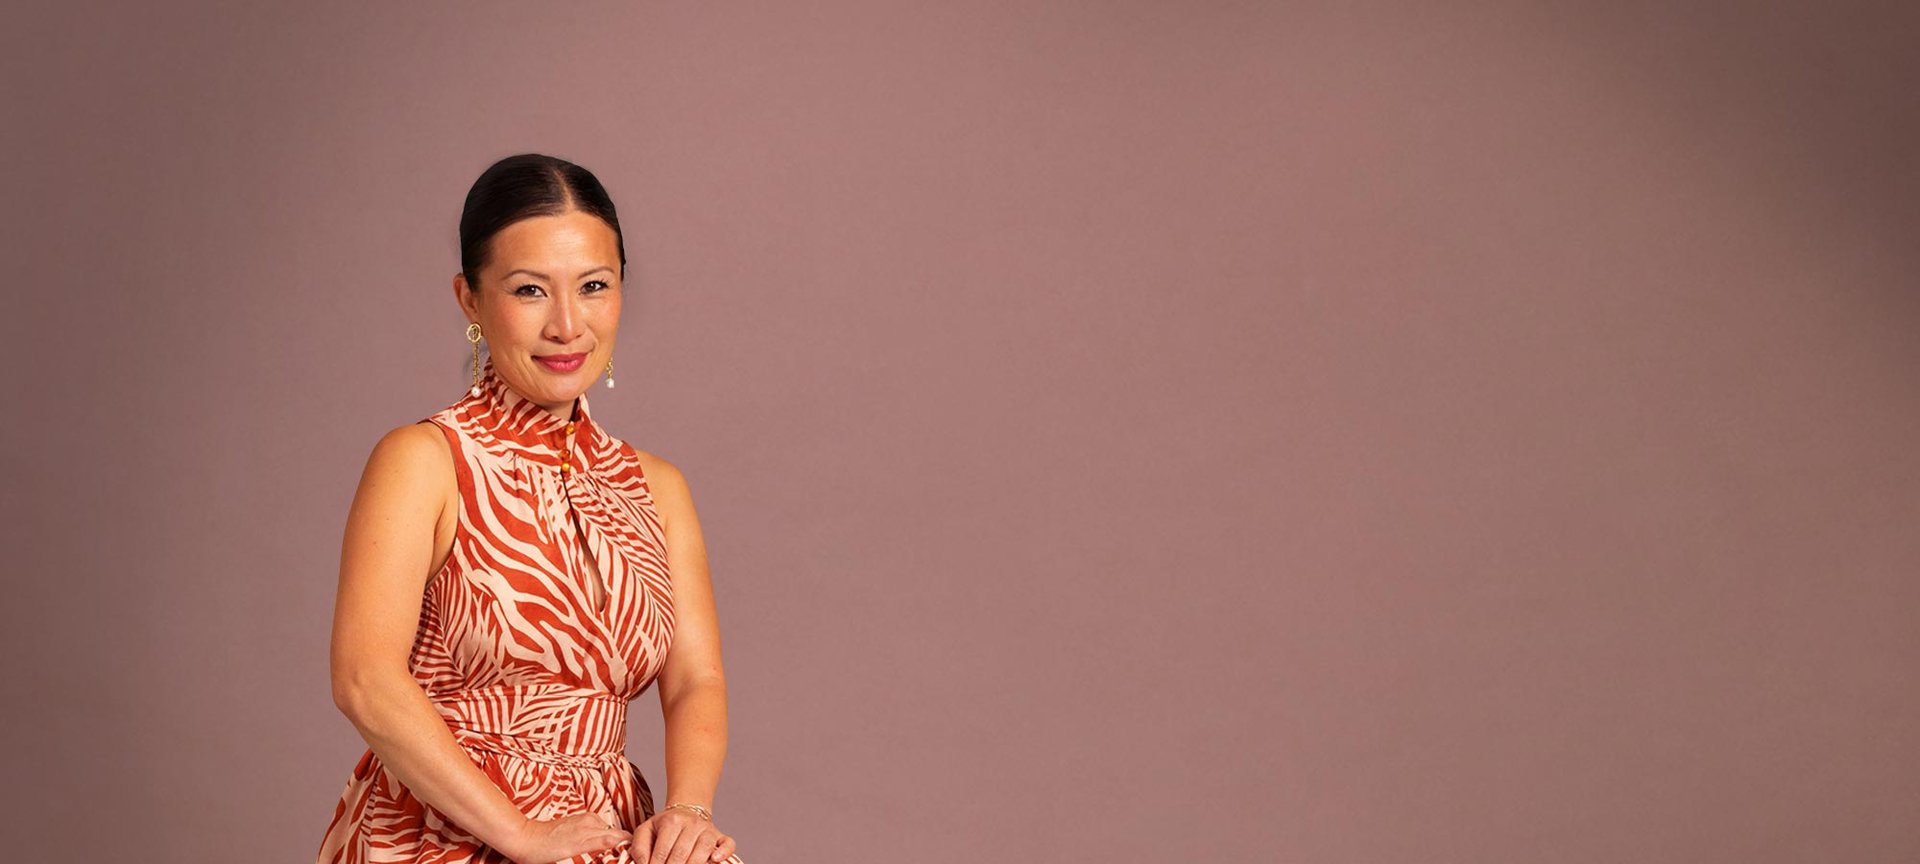 Introducing our Woman of Worth: Poh Ling Yeow | L’Oréal Paris